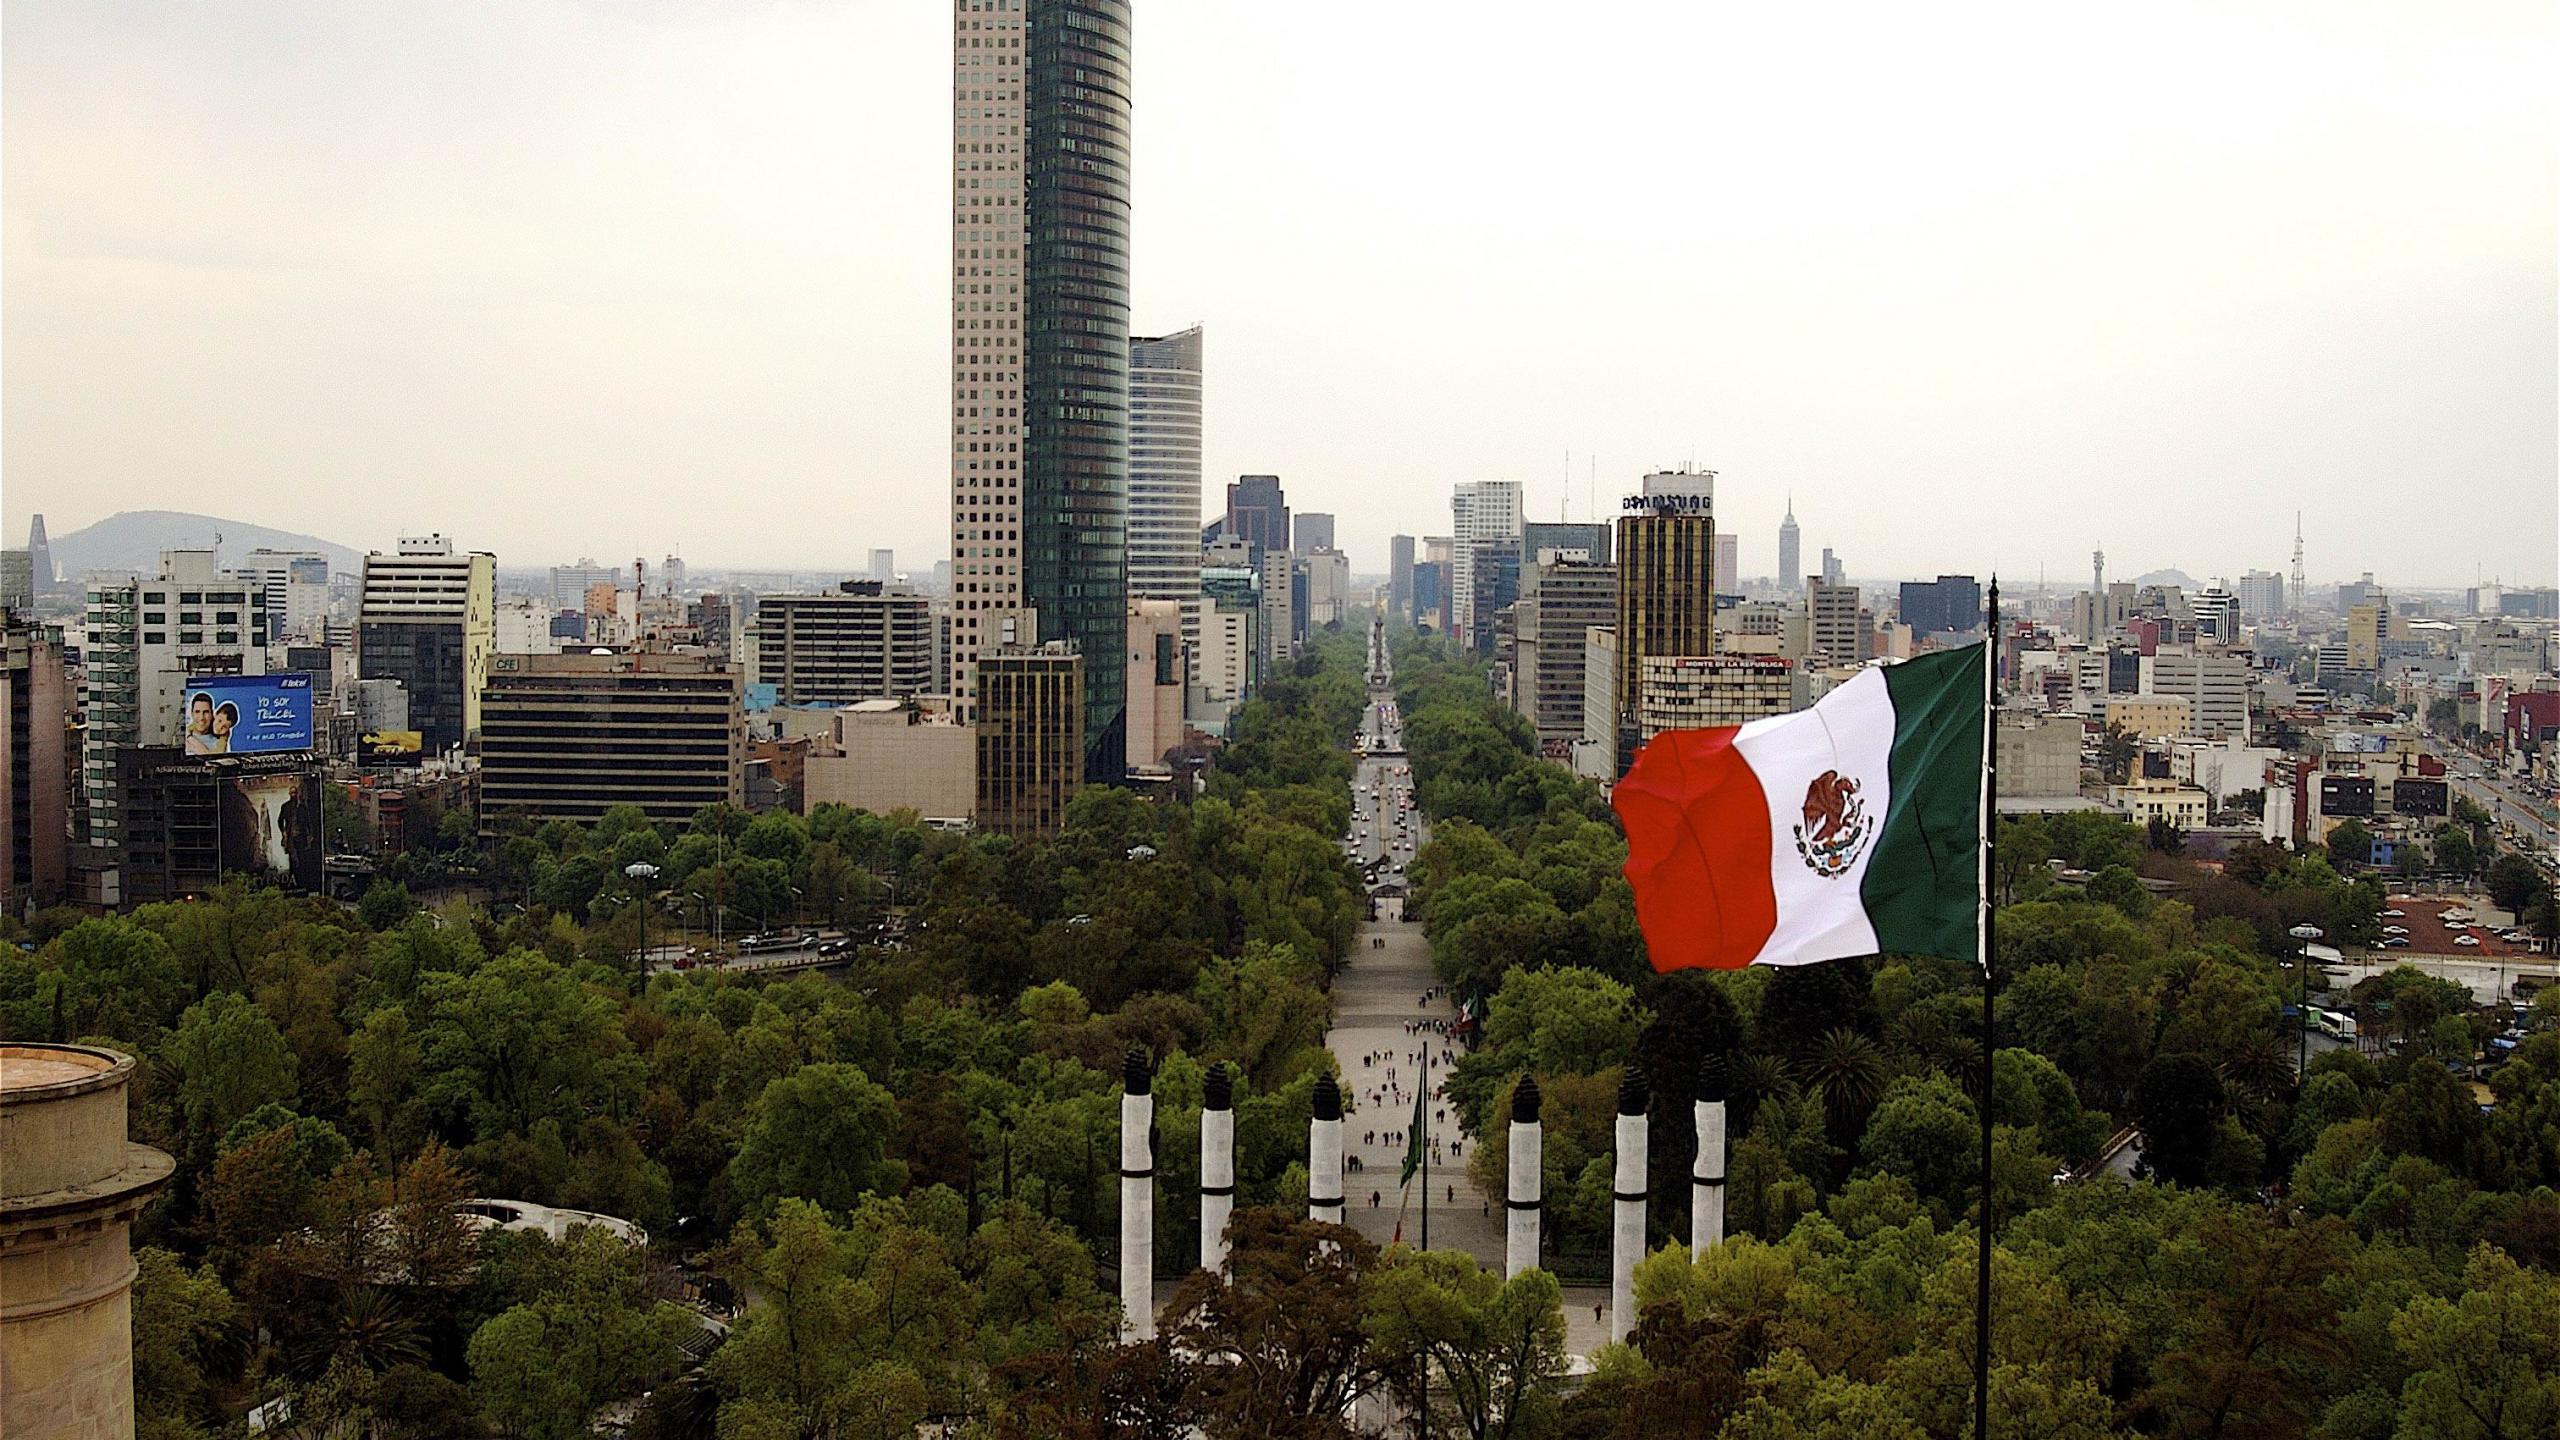 Mexico City Wallpapers Wallpaper Cave Images, Photos, Reviews